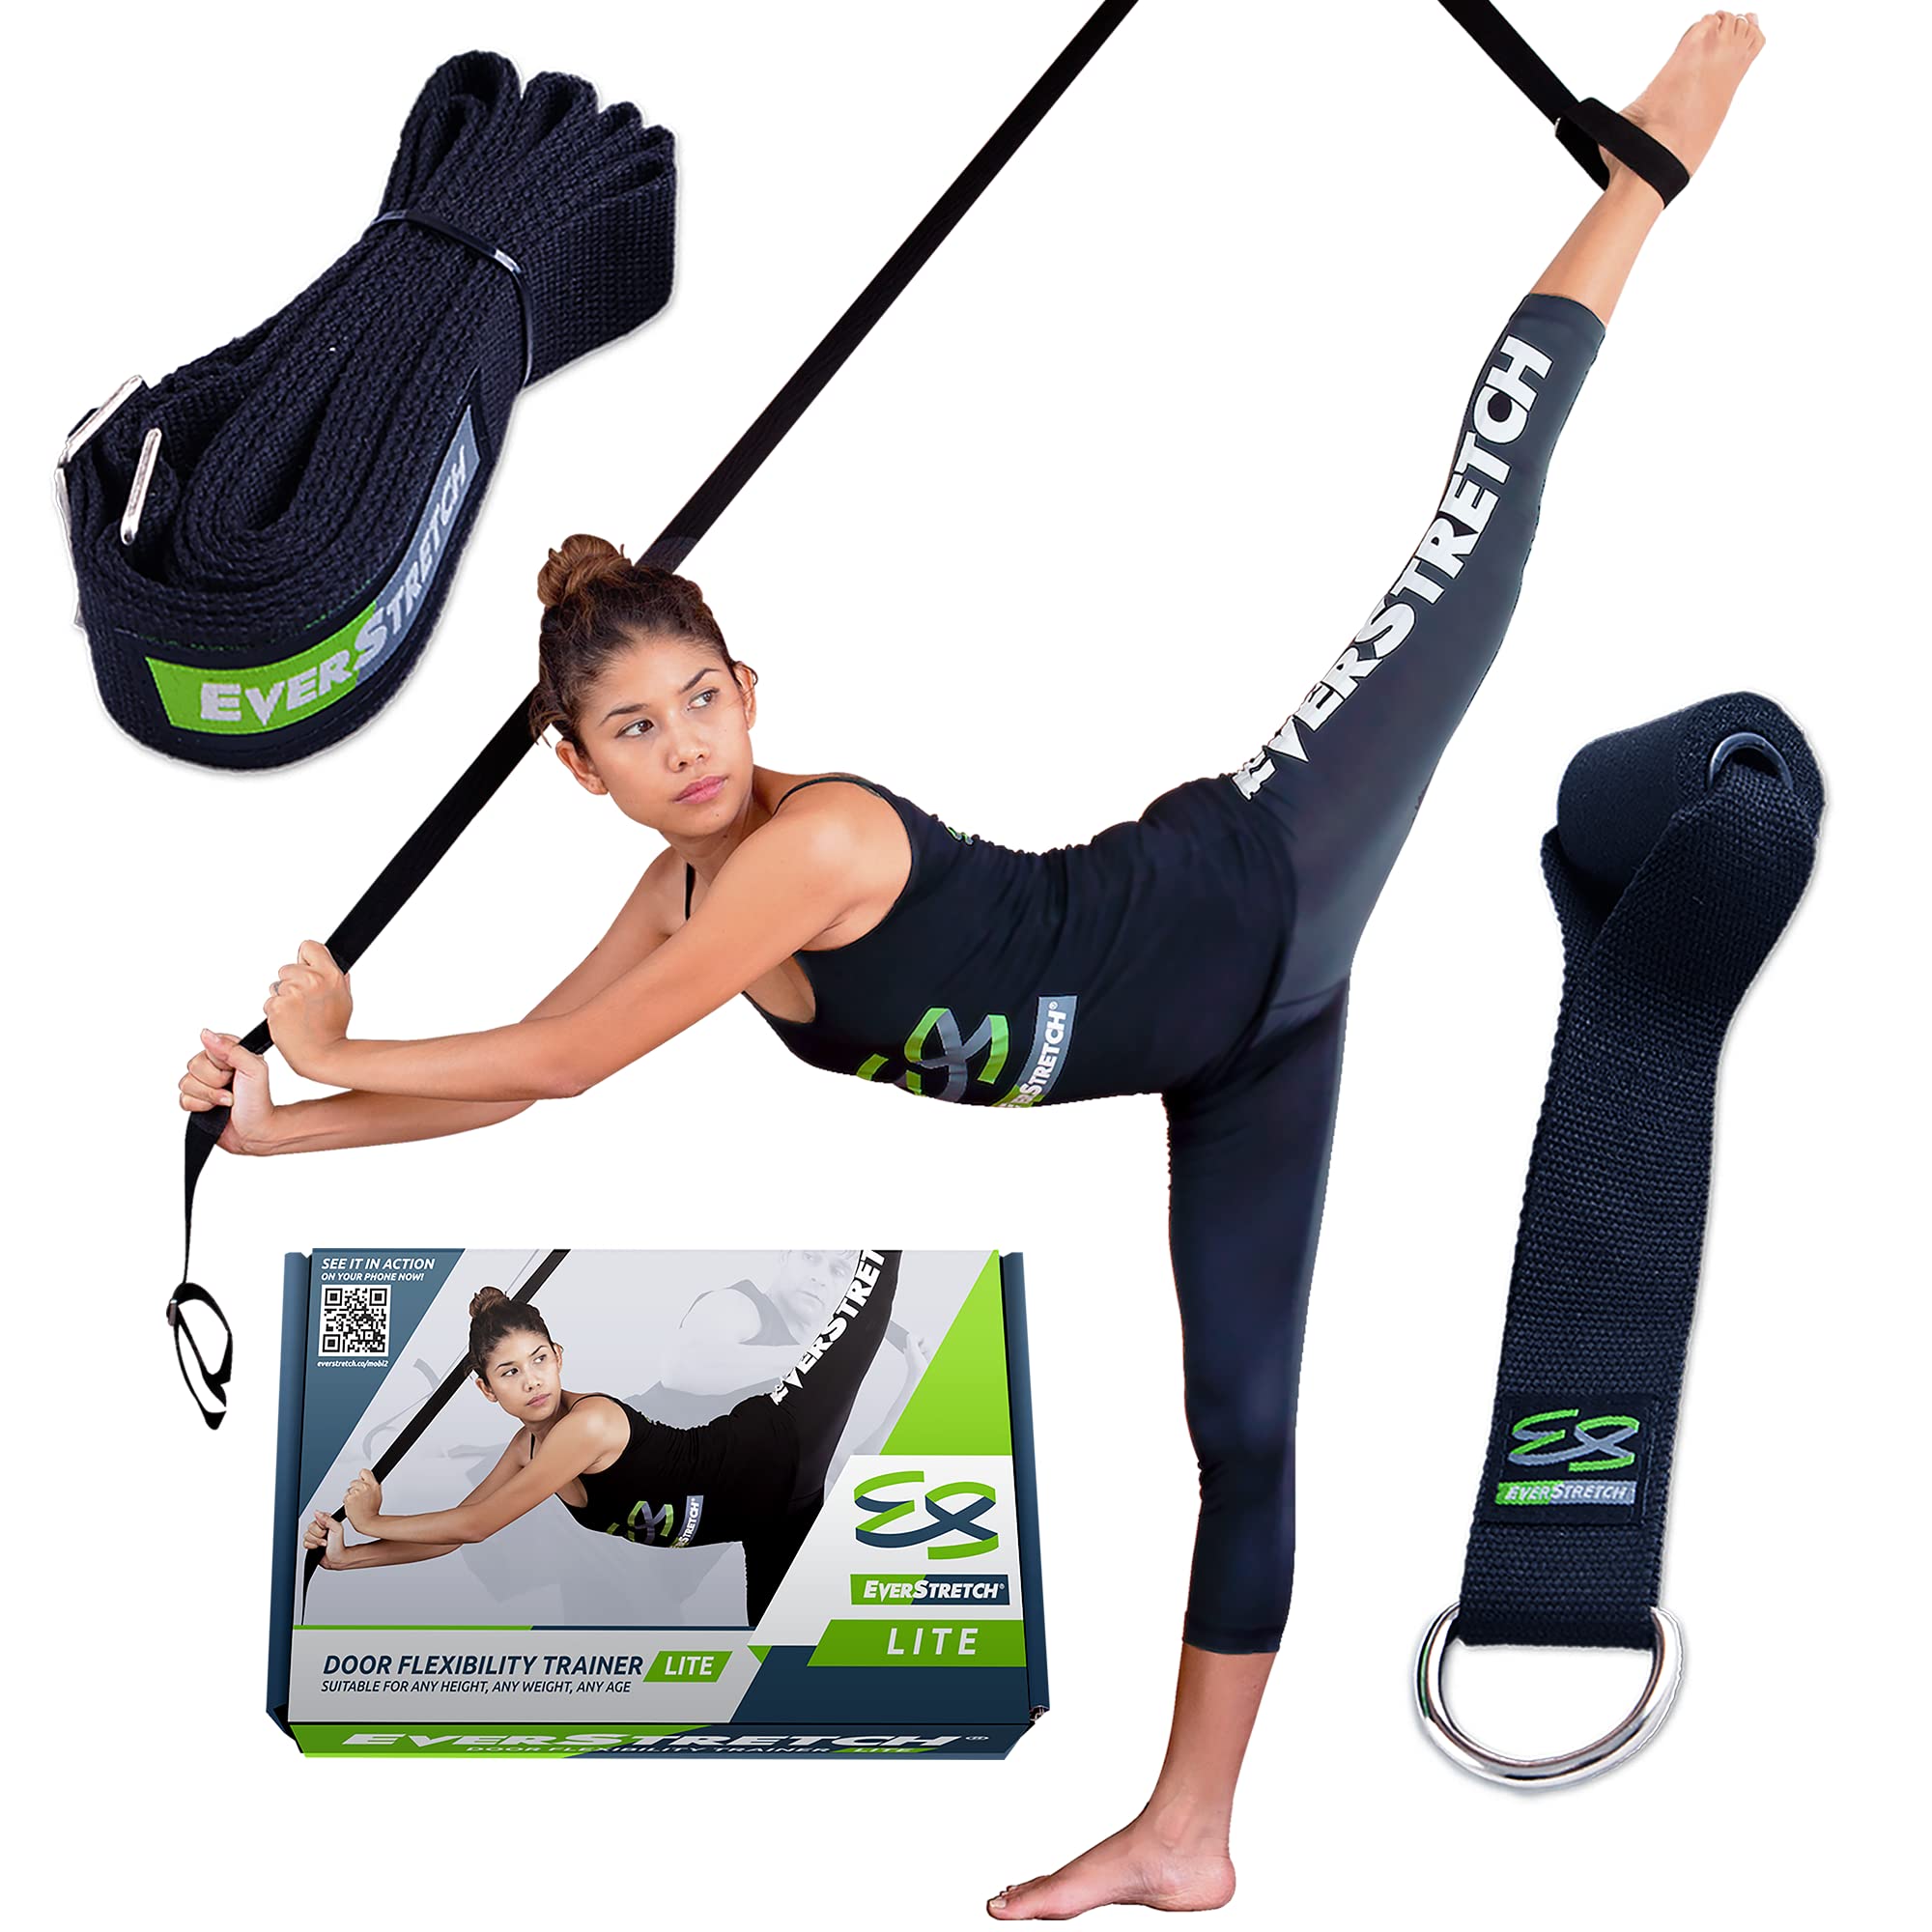 EverStretch Leg Stretcher LITE: Get Flexible with Over The Door Flexibility  Trainer, Stretching Equipment for Ballet, Dance, Martial Arts,  Cheerleading & Gymnastics